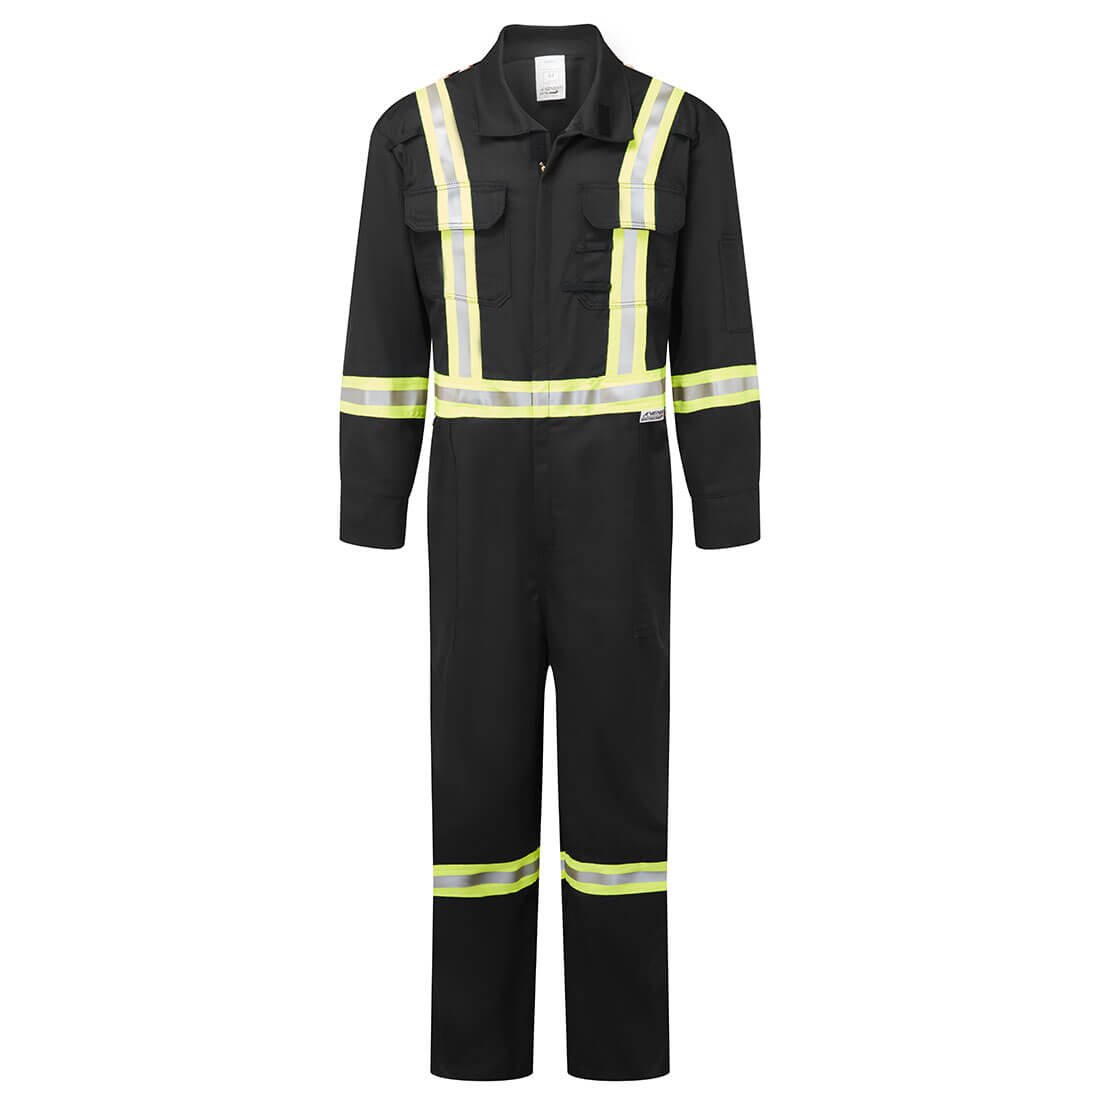 IFR Flame Resistant, Coveralls